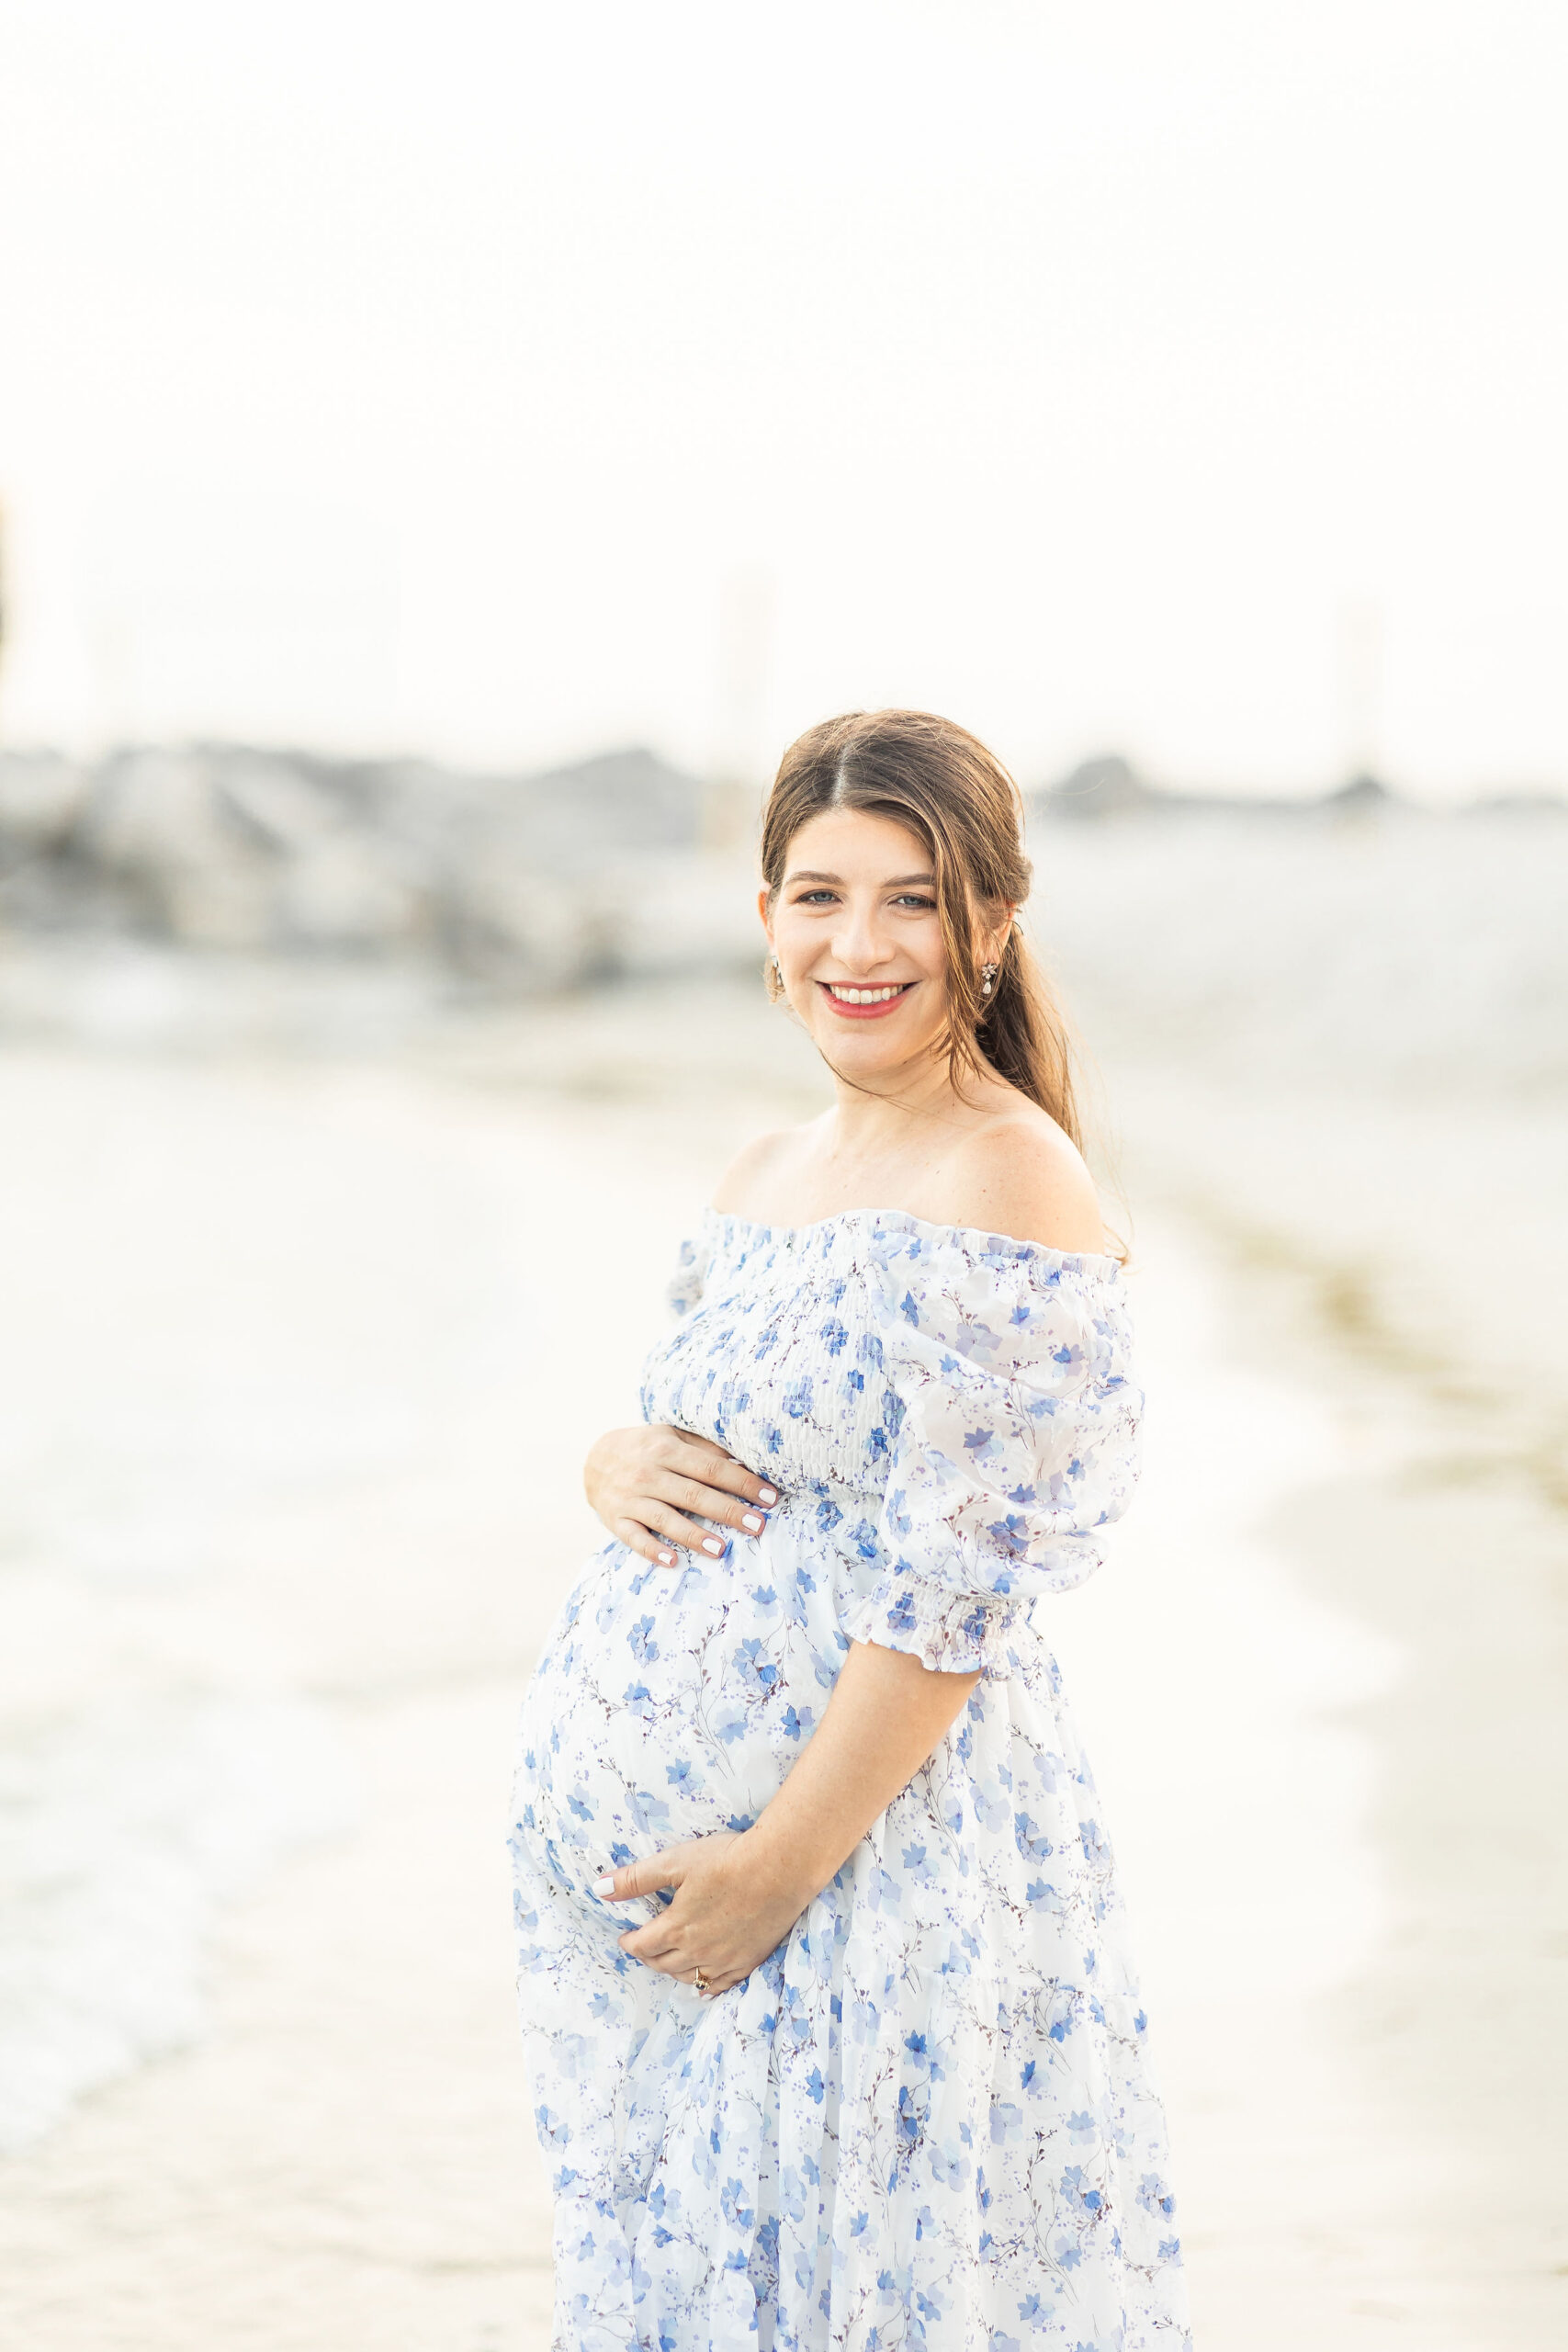 A mom to be wearing a blue floral dress stands on a beach holding her bump yoga nest